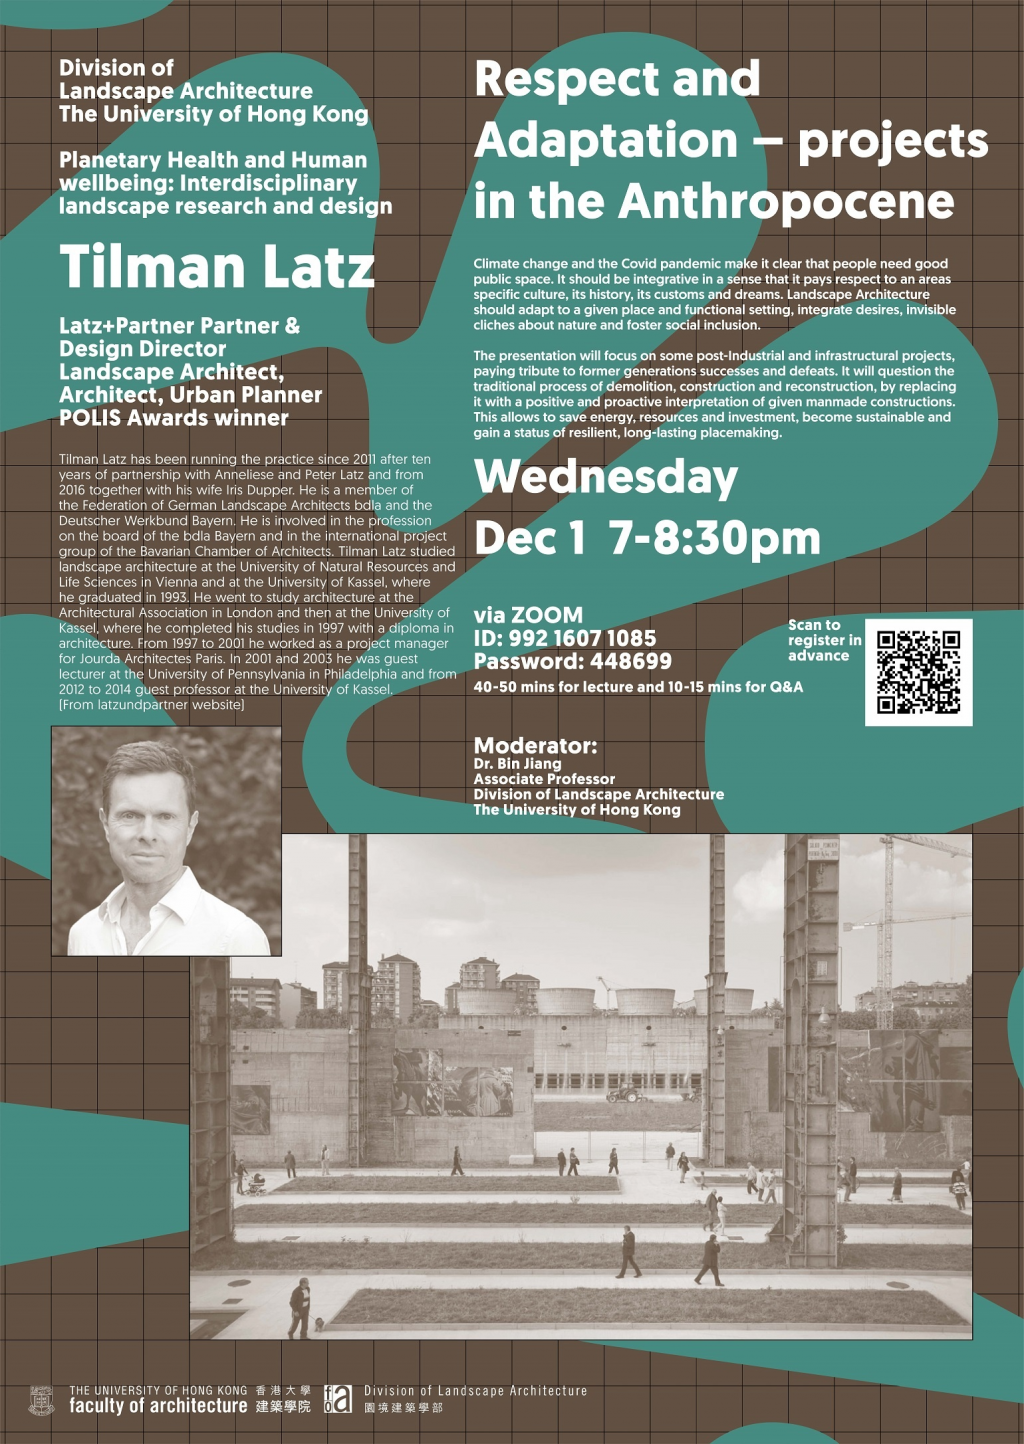 'Respect and Adaptation - projects in the Anthropocene' by Tilman Latz | 1 Dec, 7-8:30pm | Zoom